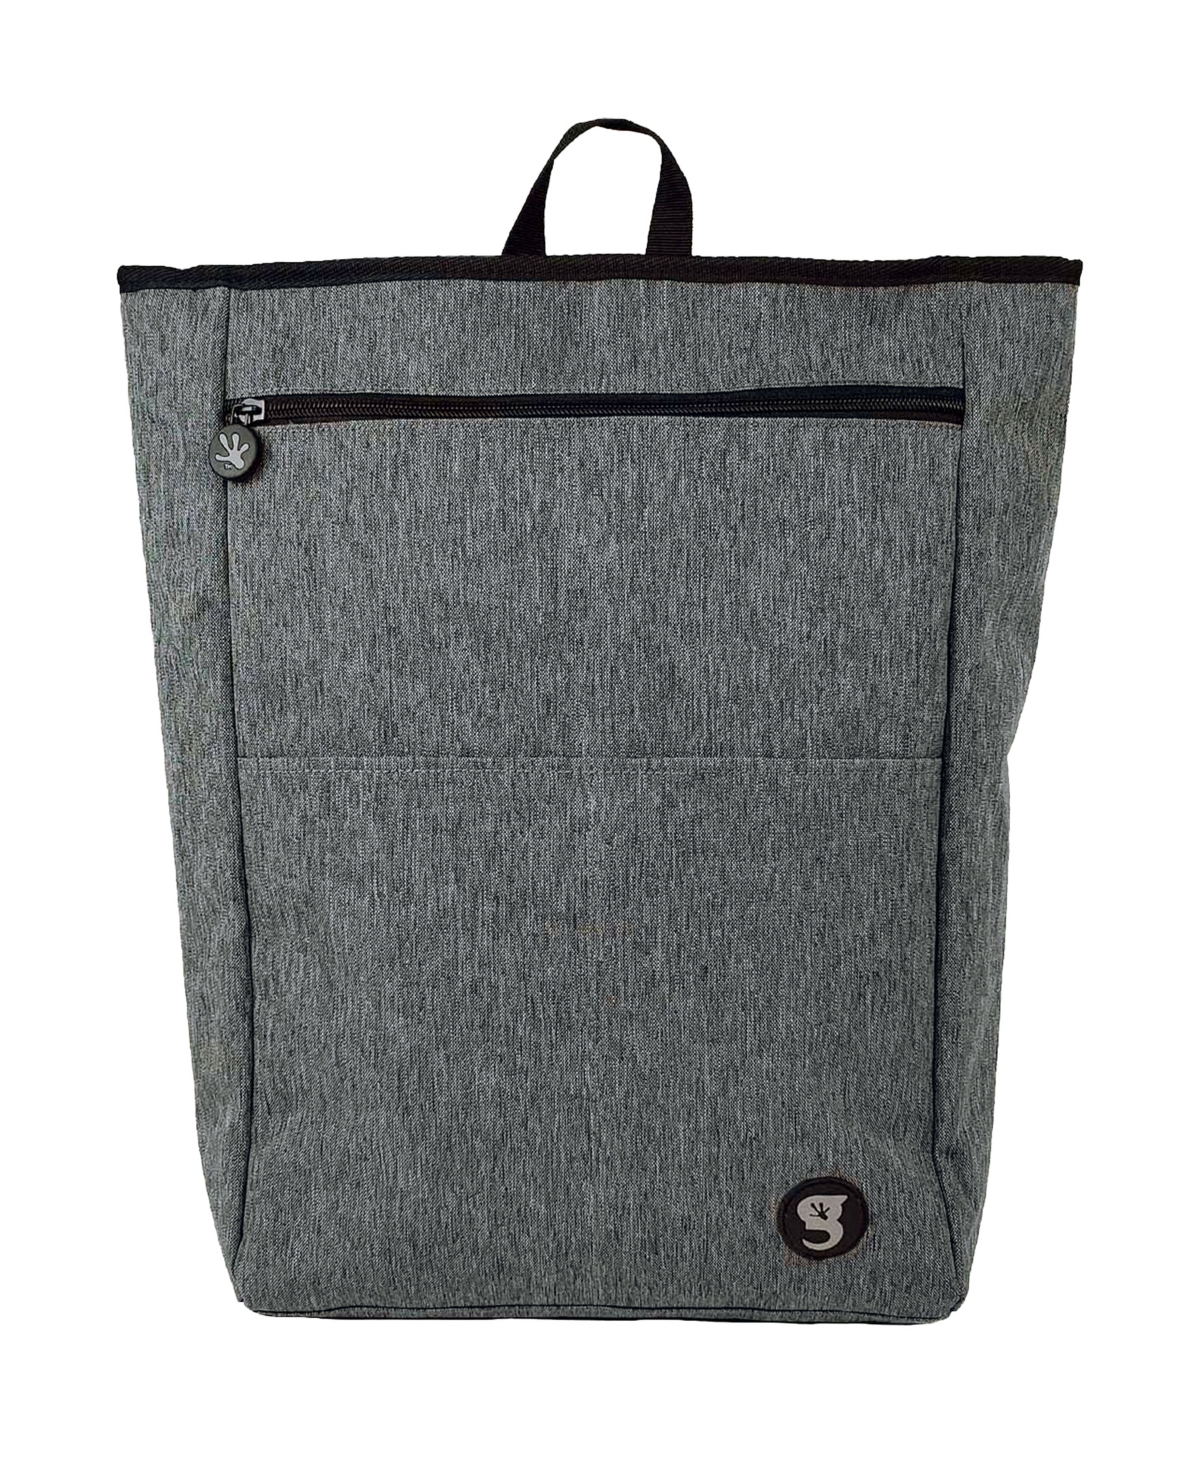 Geckobrands Inspire Backpack In Everyday Gray